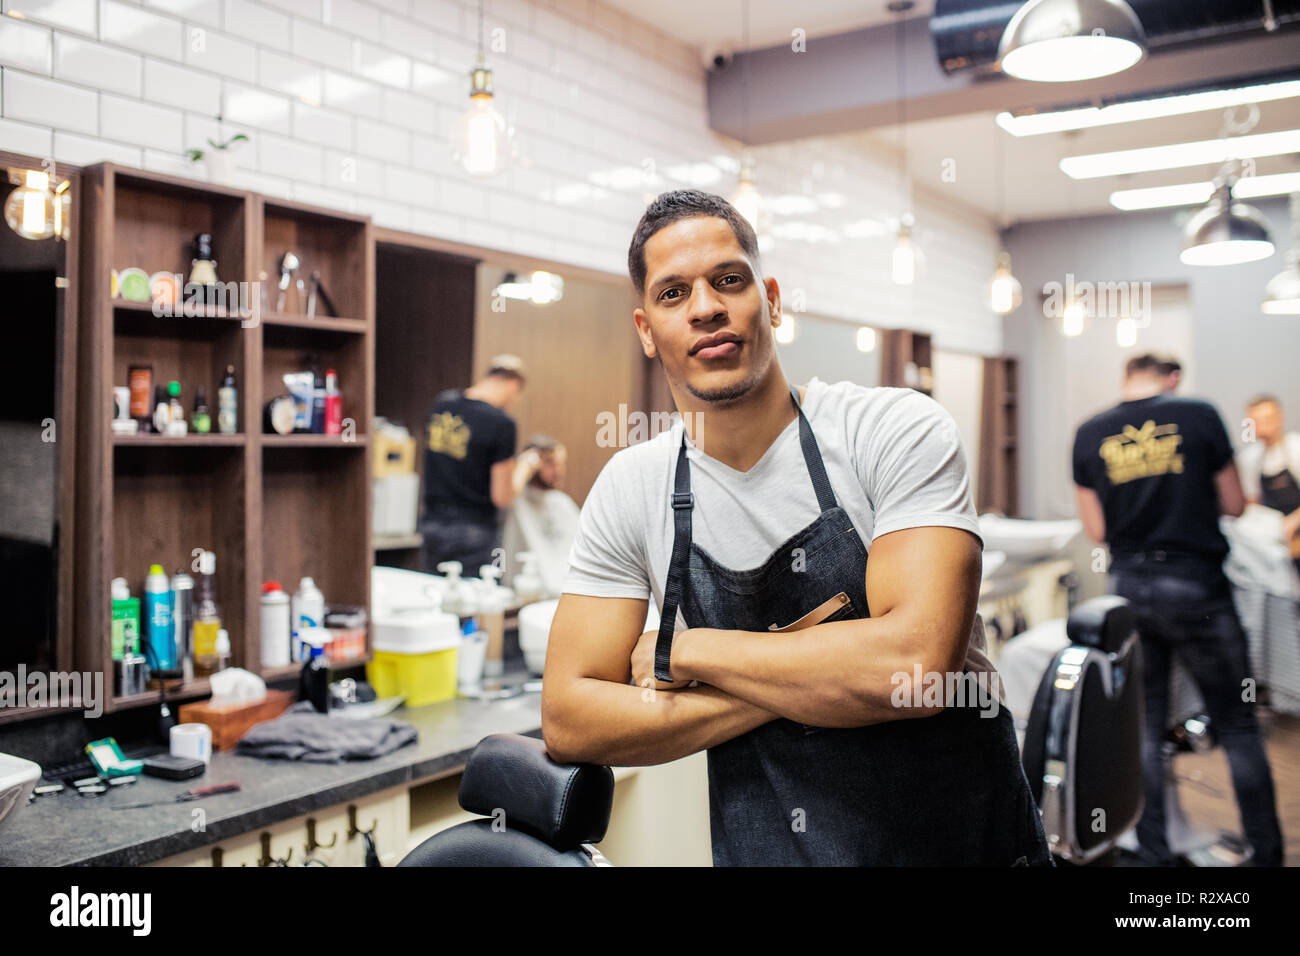 Young hispanic haidresser and hairstylist standing in barber shop, arms crossed. Stock Photo